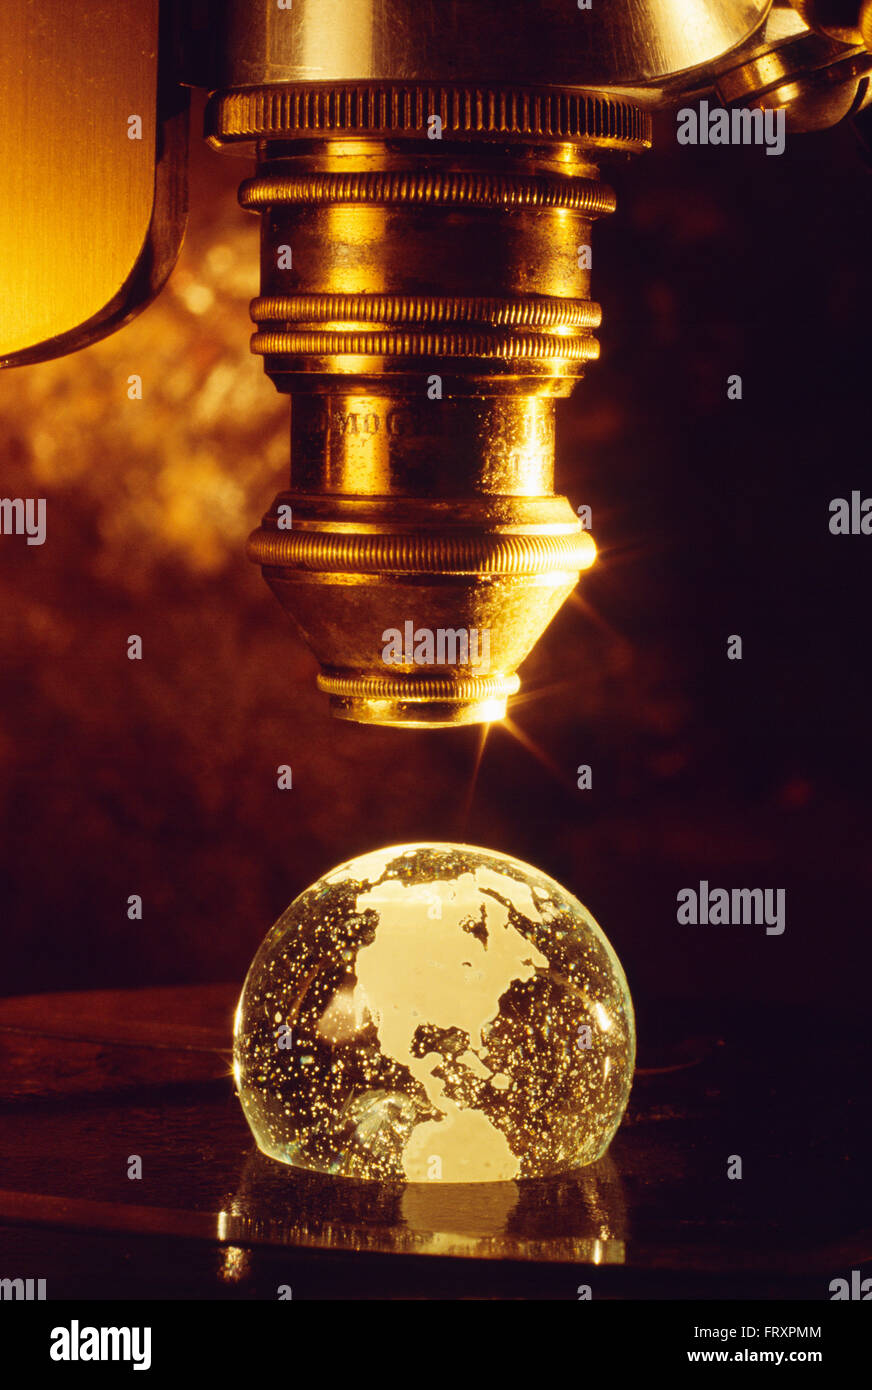 Close-up of an Antique Microscope Objective Viewing an Earth Globe Stock Photo